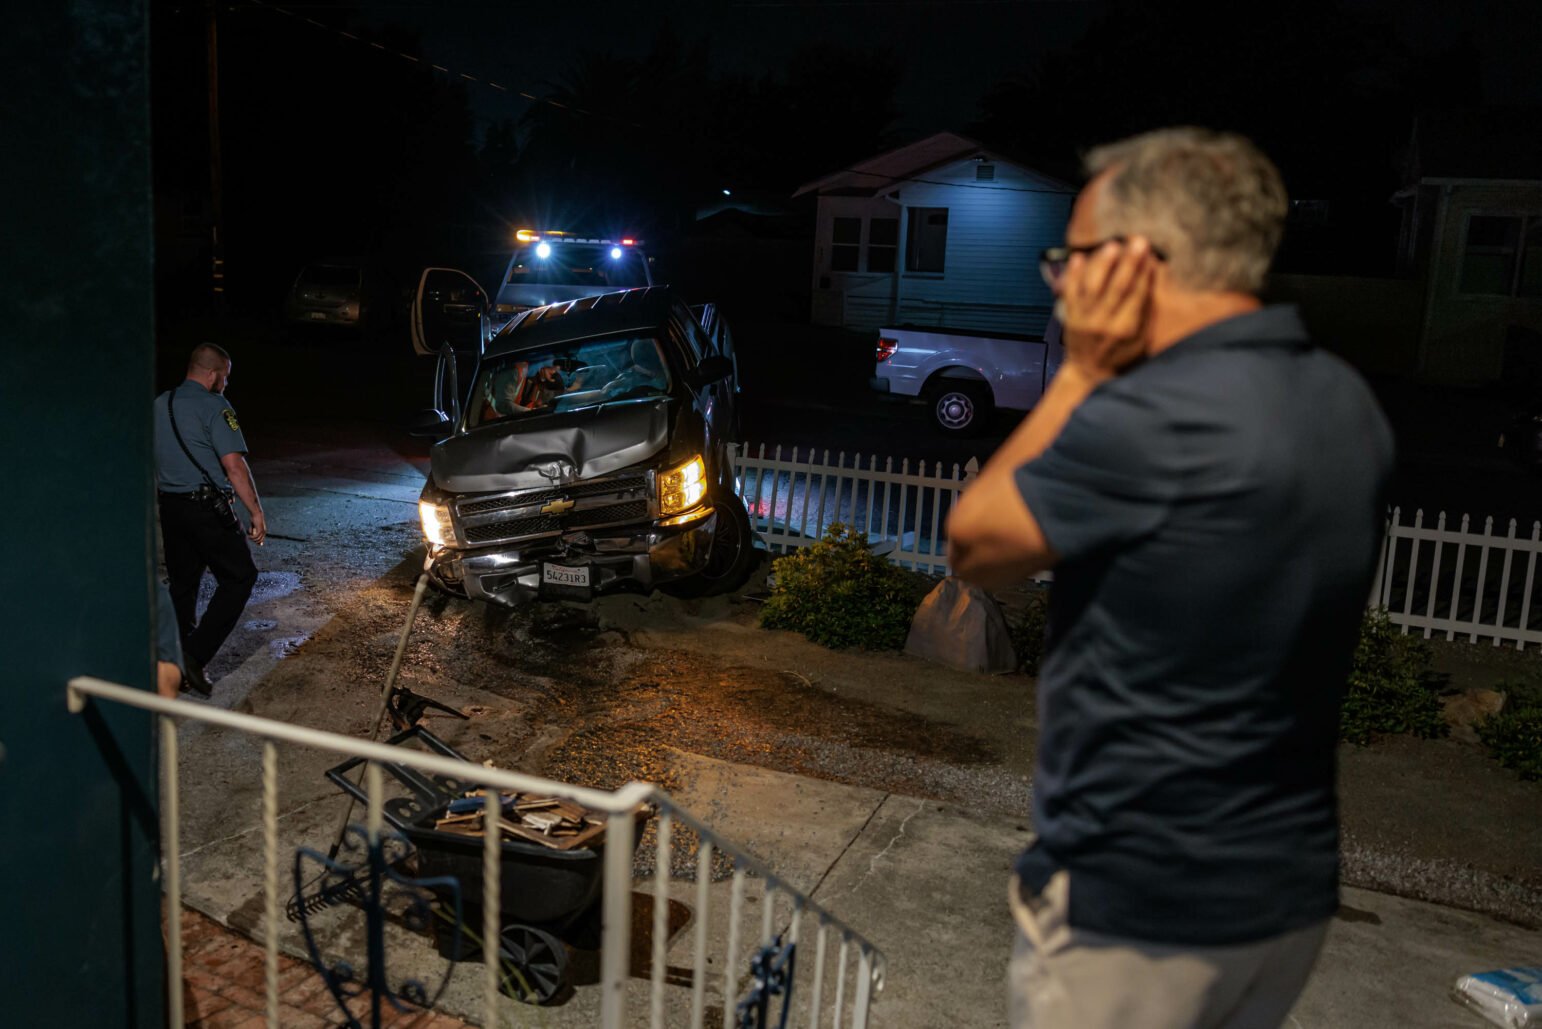 Close-up nighttime scene of a damaged silver pickup truck crashed into a white picket fence. A police officer is inspecting the scene while a man in a blue shirt stands nearby while speaking on the phone. The area is lit by the flashing lights of a tow truck and police car.